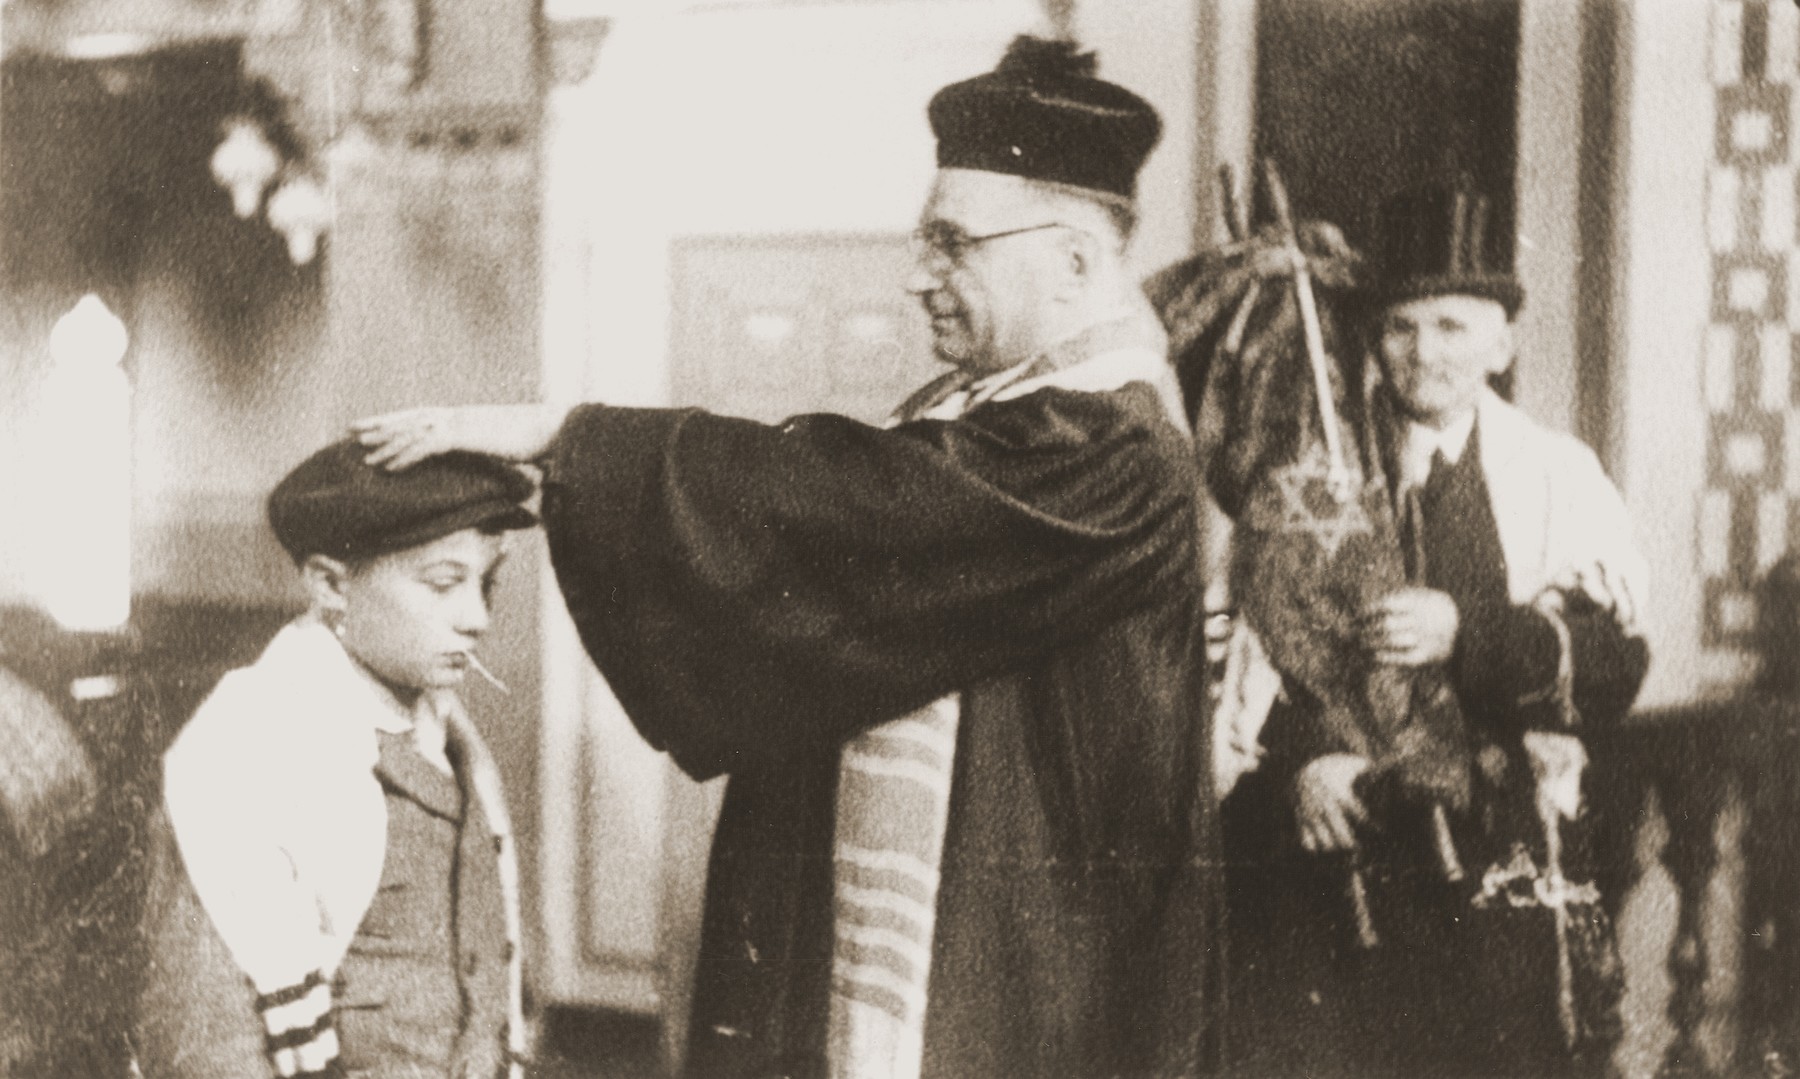 At the liberal Zerrennerstrasse synagogue in Pforzheim, Cantor Hermann Levy blesses Siegbert Levy during his bar mitzvah, while Siegbert's great-uncle (holding the Torah scroll) looks on.